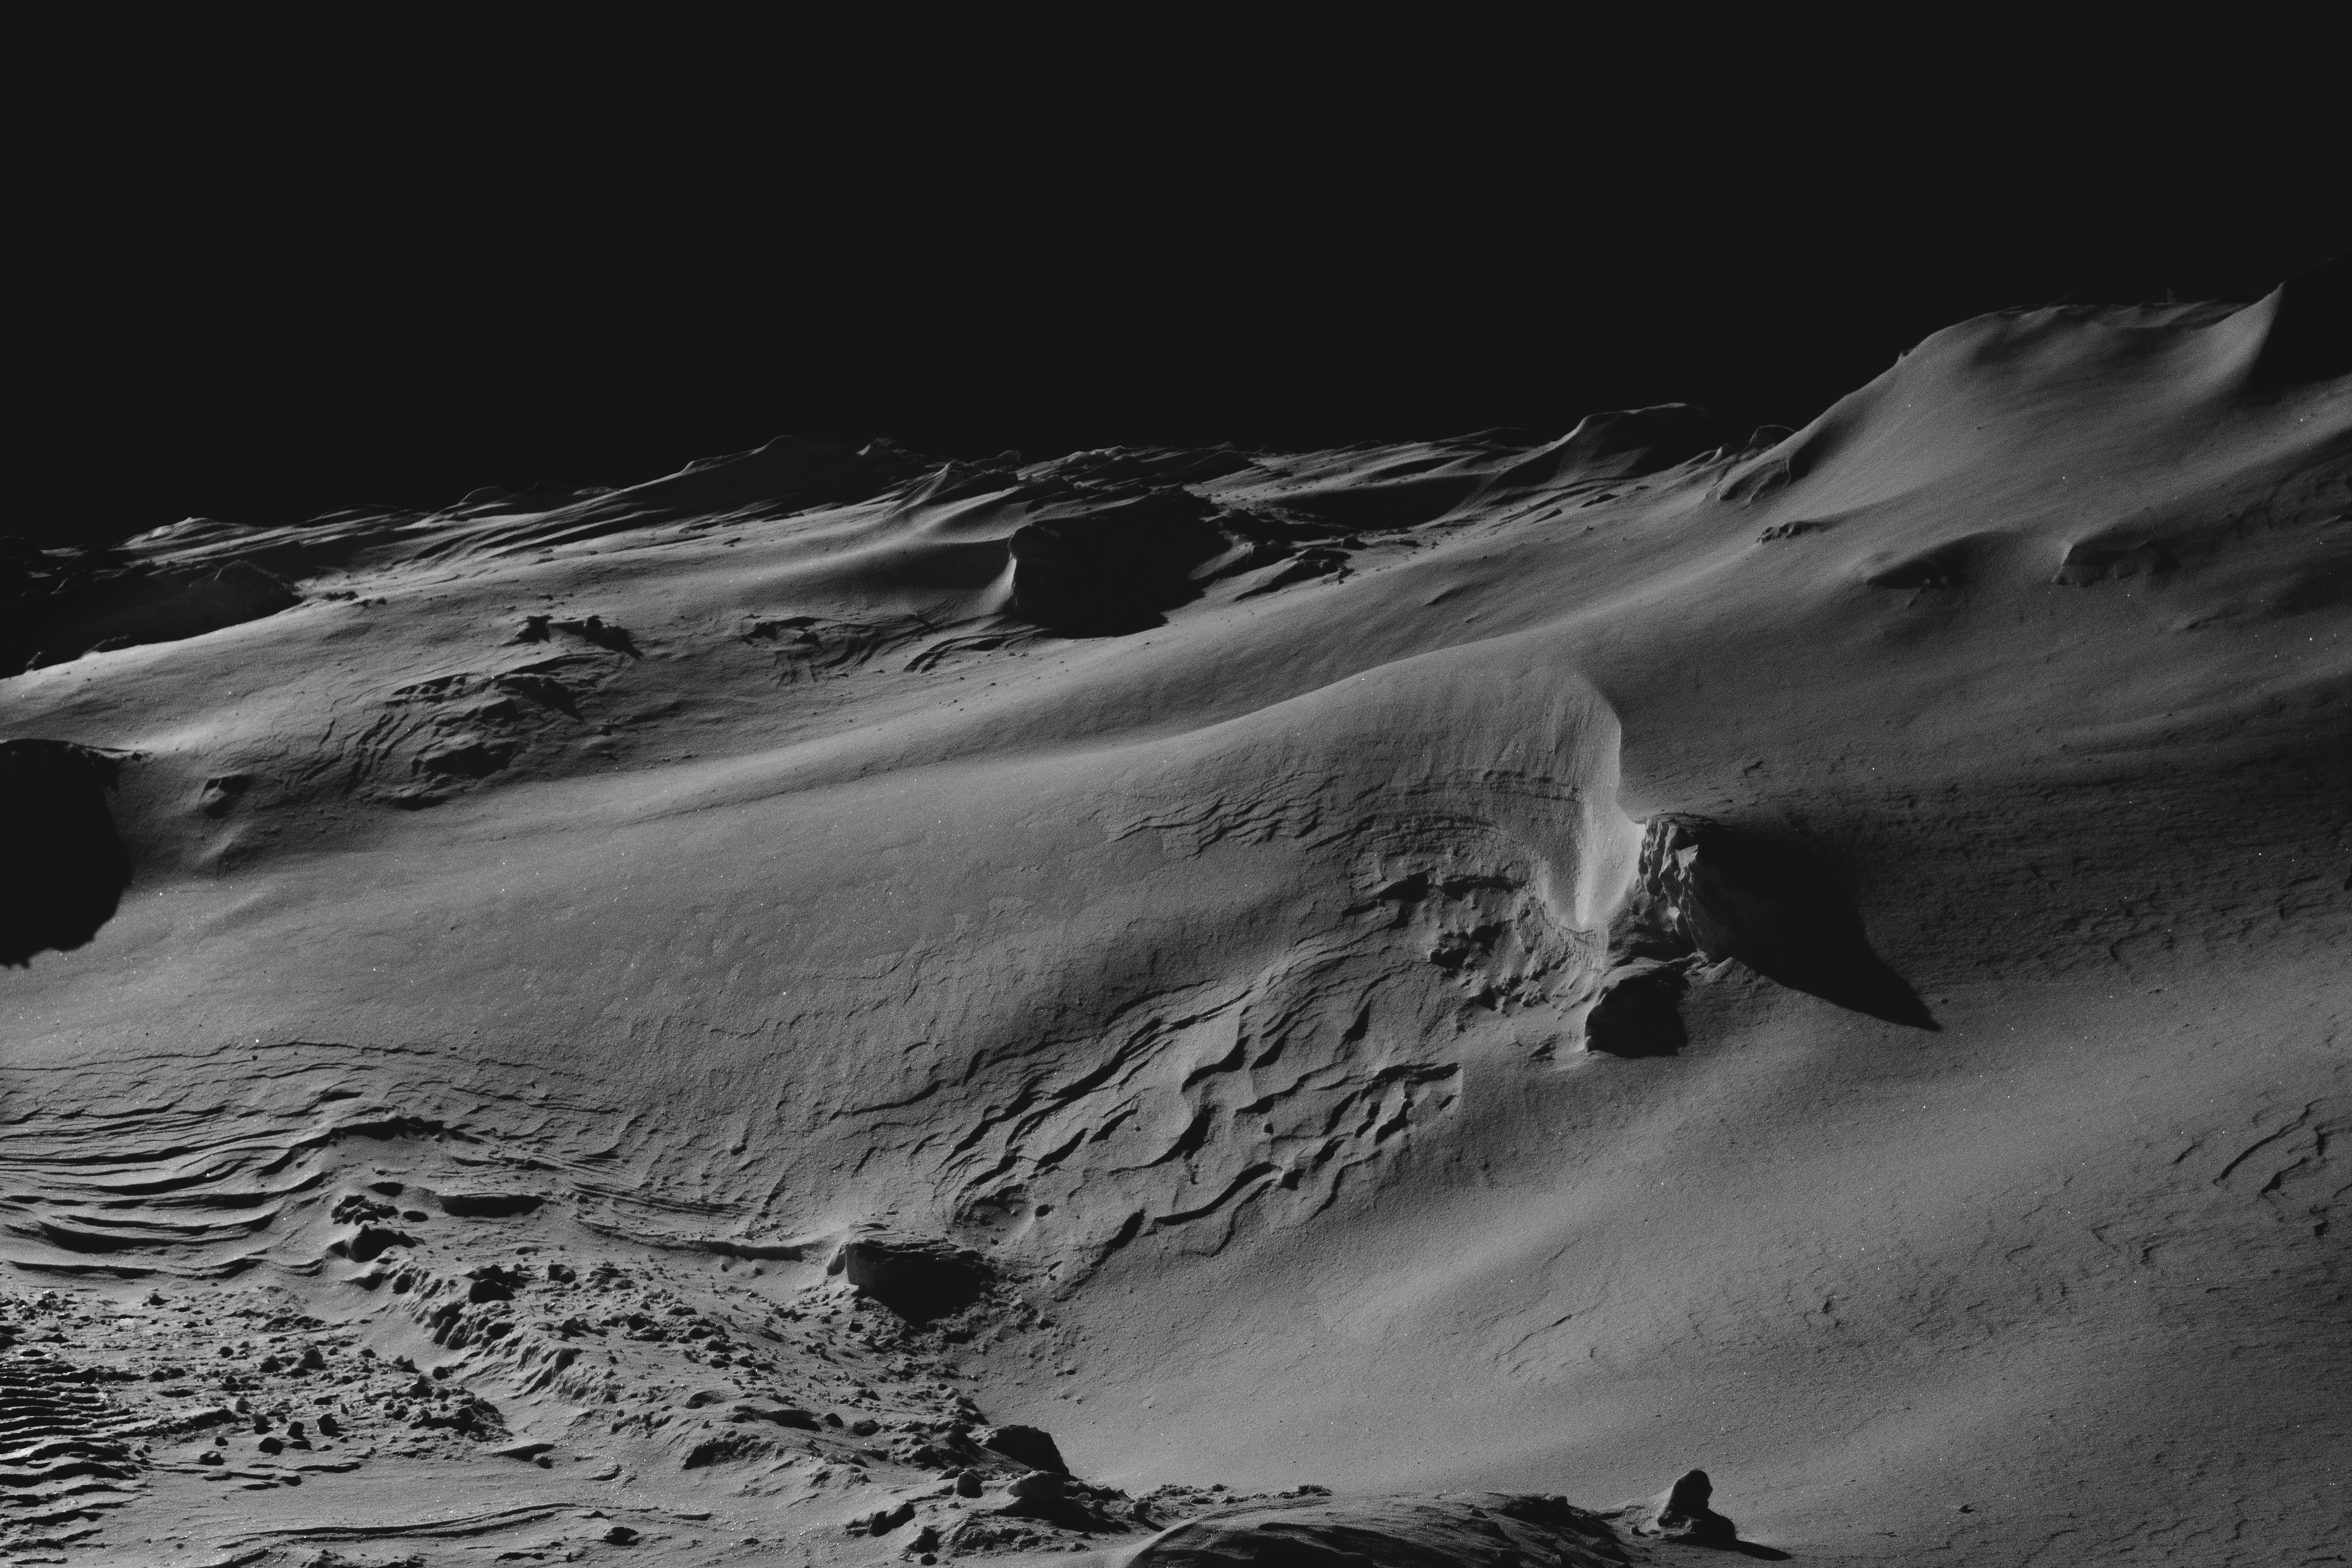 A dark, black-and-white landscape photograph meant to look like the surface of the moon.